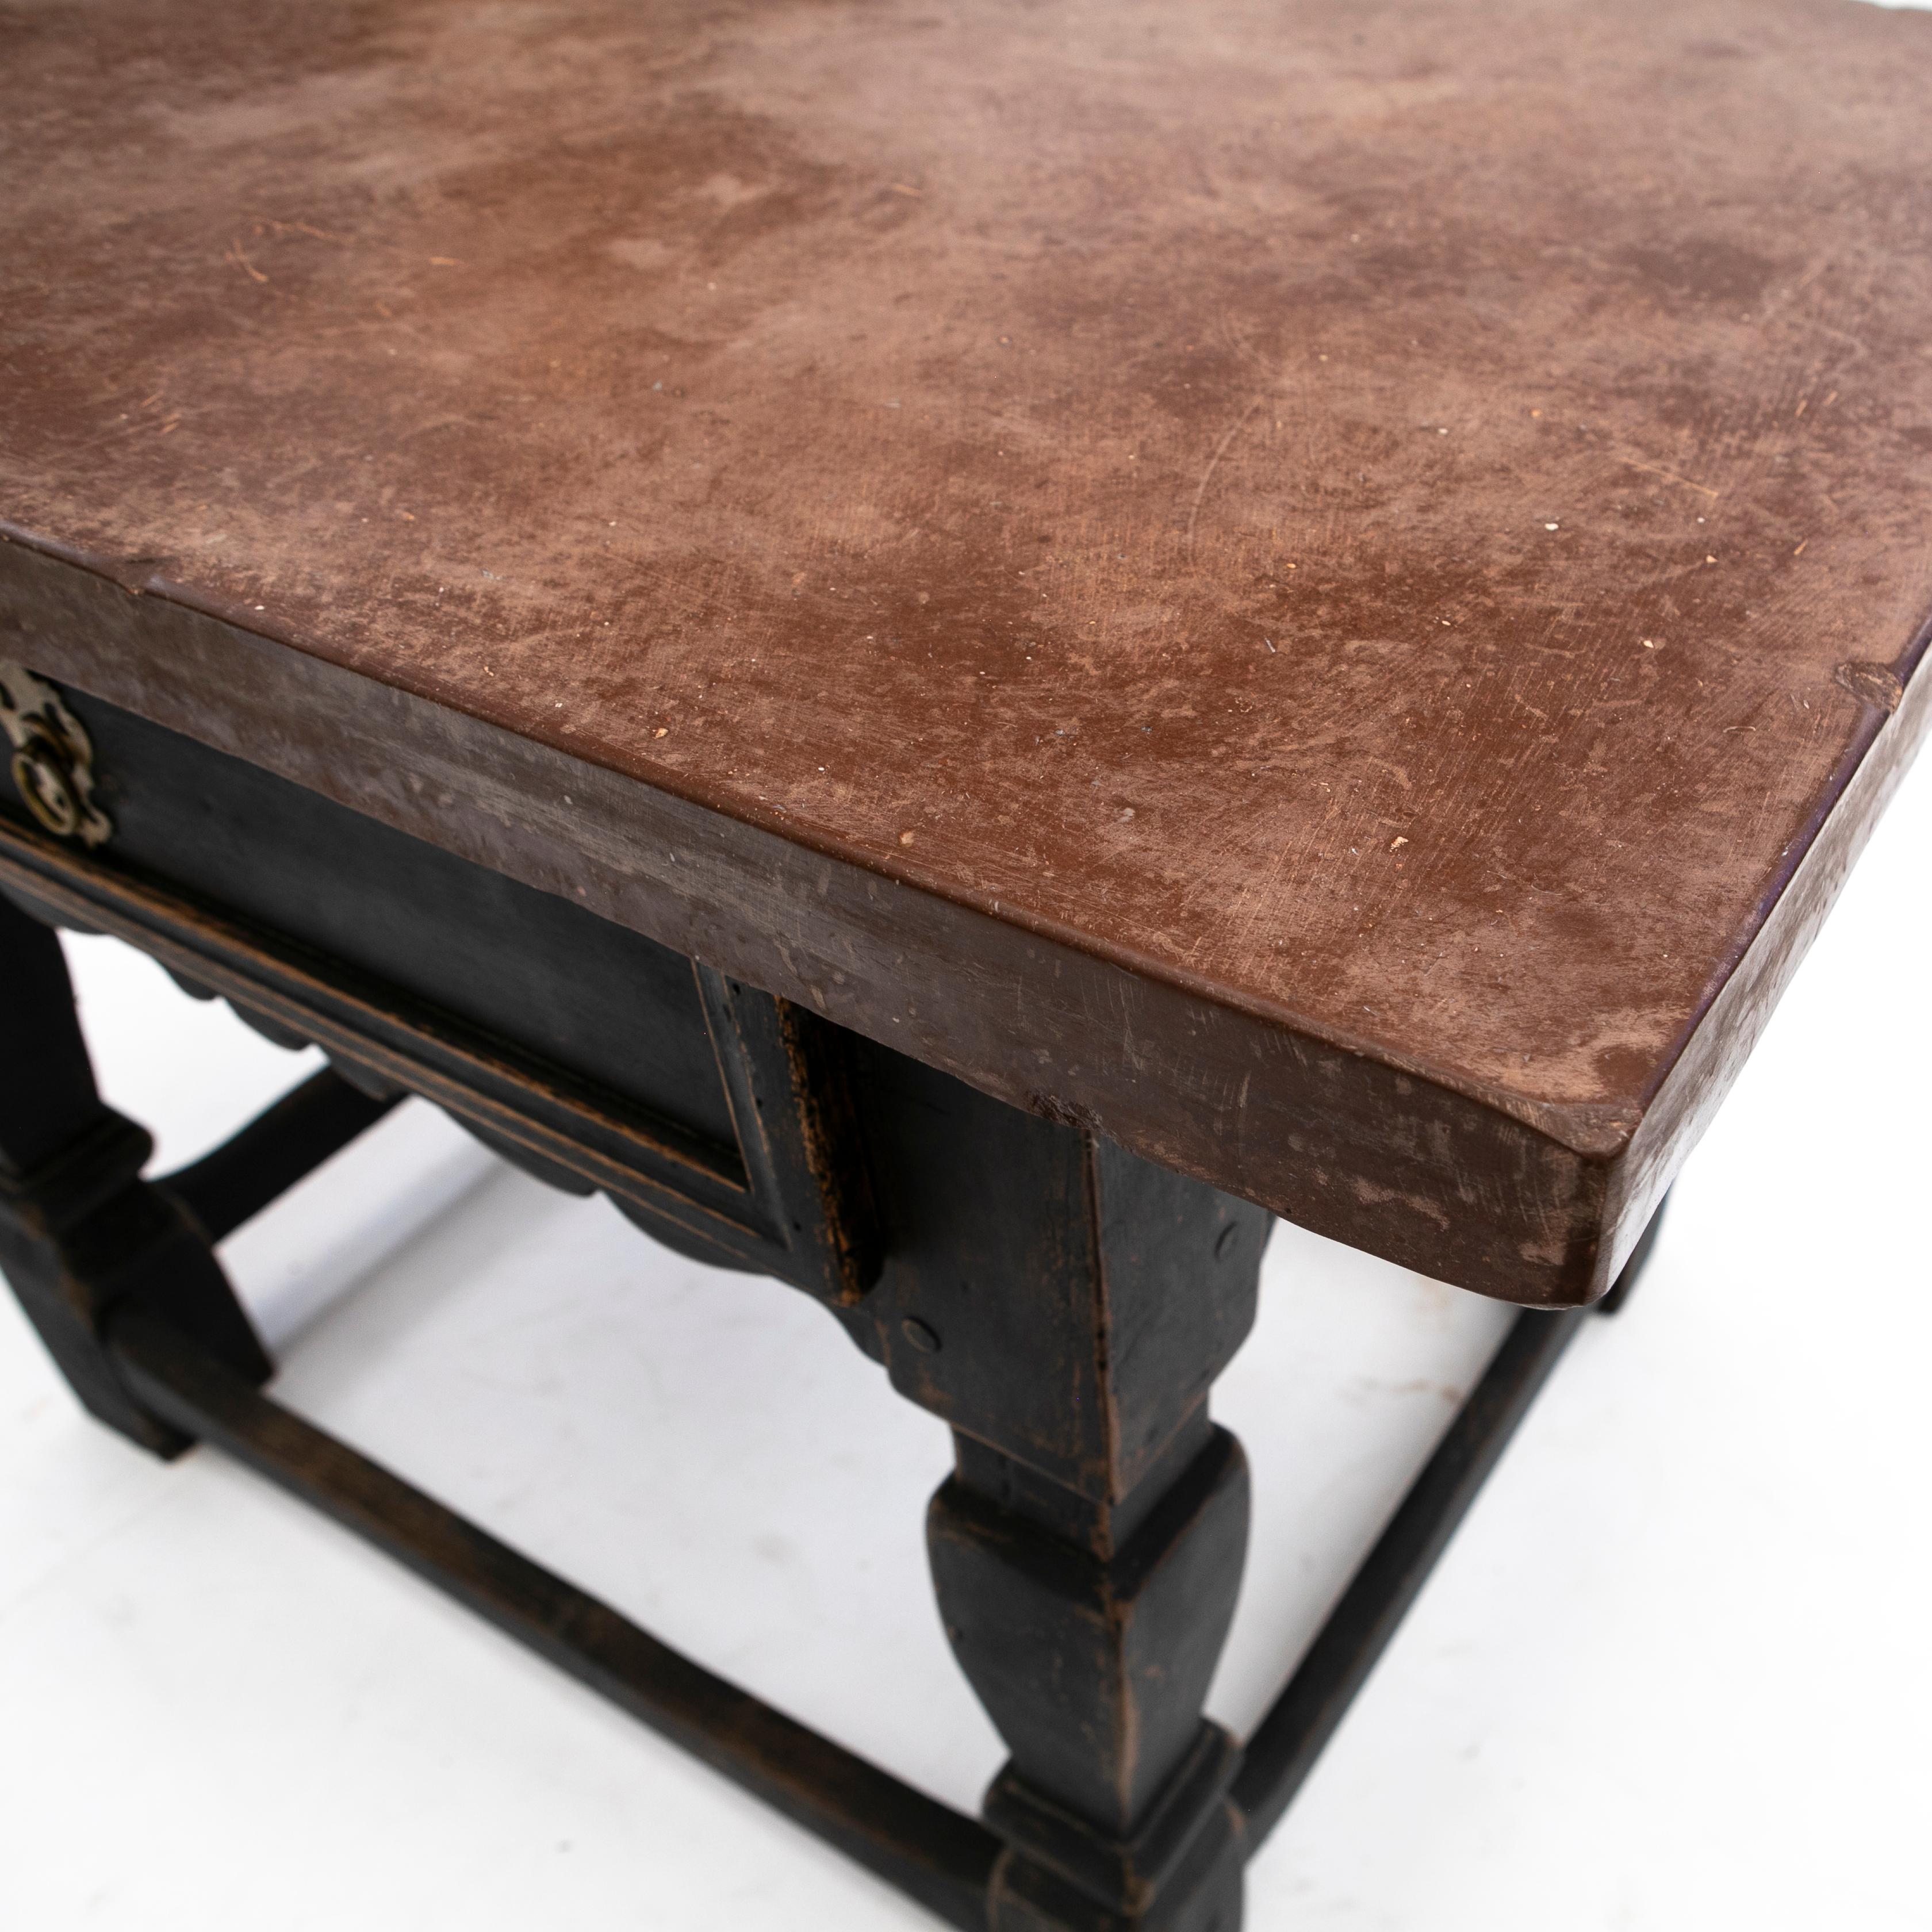 A Swedish baroque table reddish brown Öland limestone top (5 cm. thick).
Black painted oak frame featuring one large drawer with room divider. Resting on powerful baroque legs joined by foot stretchers with having normal signs of age and use with a